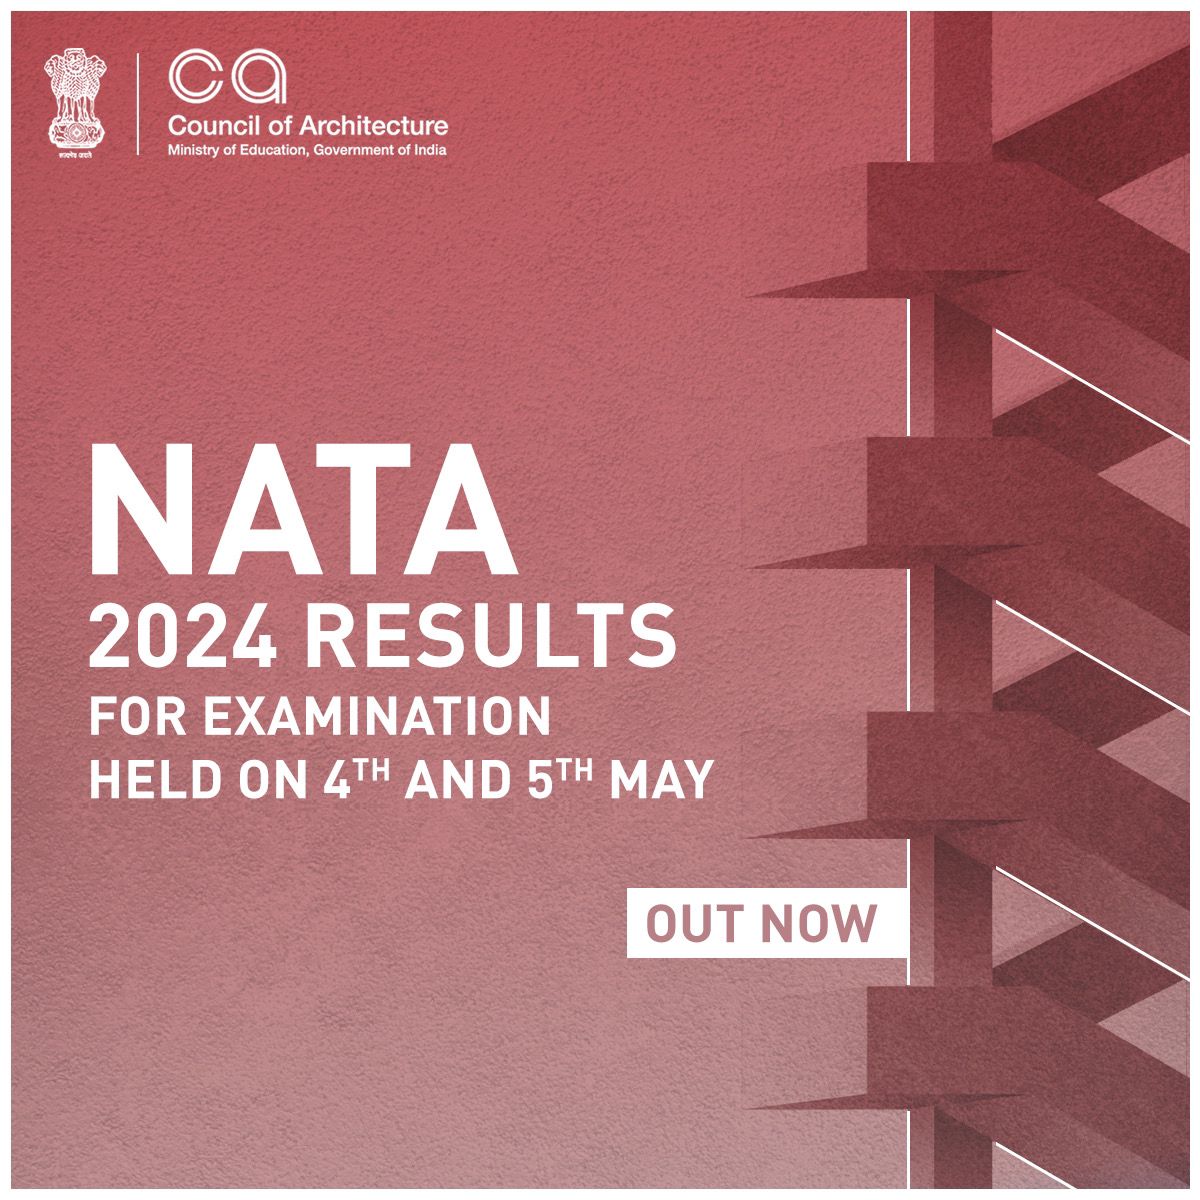 The wait is over, future architects!
NATA 2024 results for the May 4th & 5th exams are officially out!

Head over to the official NATA website to check your scores and take the next step on your #architectural journey.

#NATAResults #ArchitectsOfTheFuture #councilofarchitecture